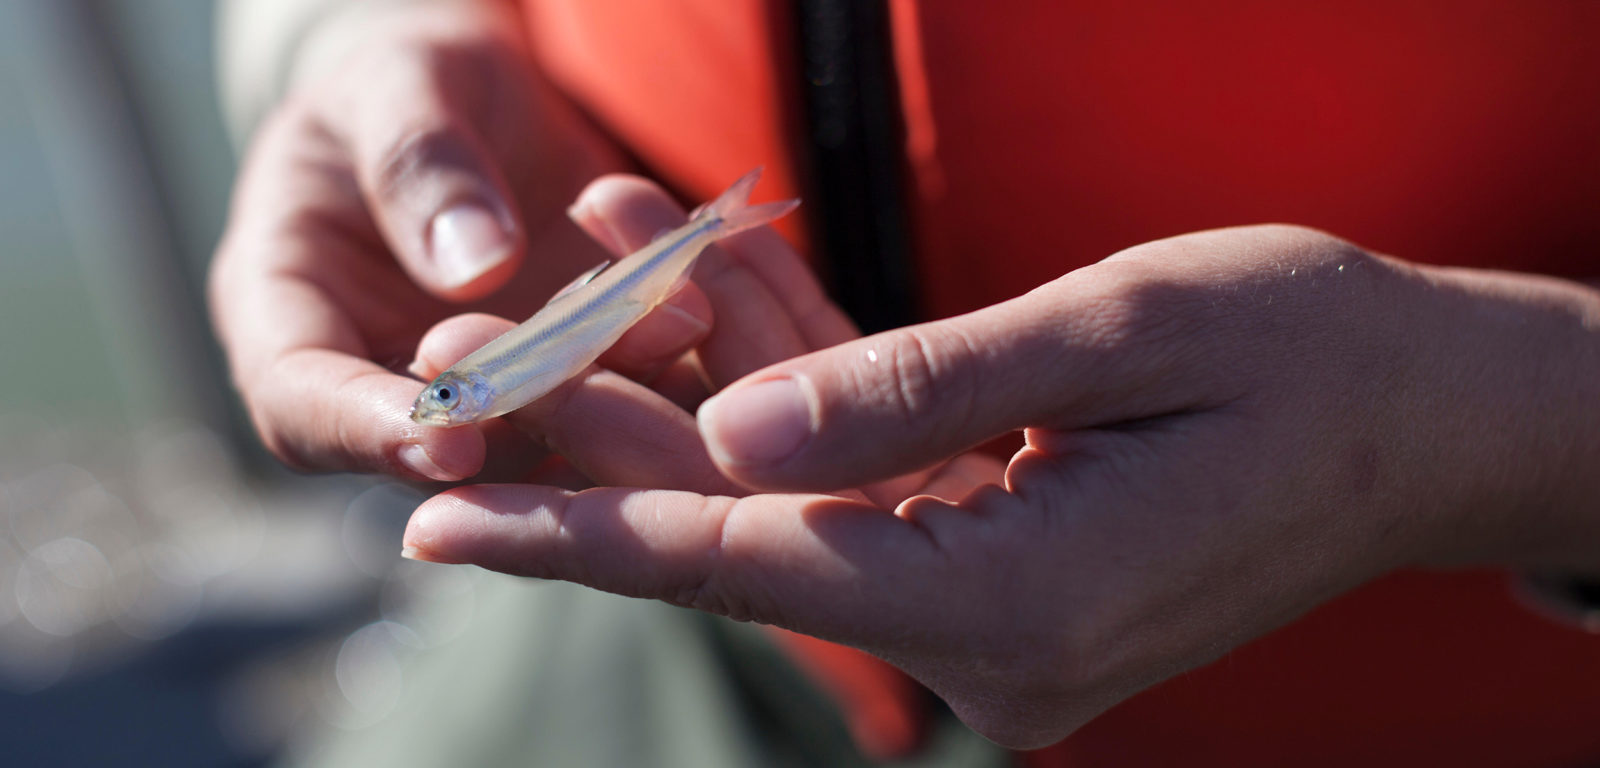 The delta smelt, once the most abundant fish in California’s San Francisco estuary, is now critically endangered. An experimental hatchery project aims to save the species. (Photo by Cavan Images/Alamy Stock Photo)